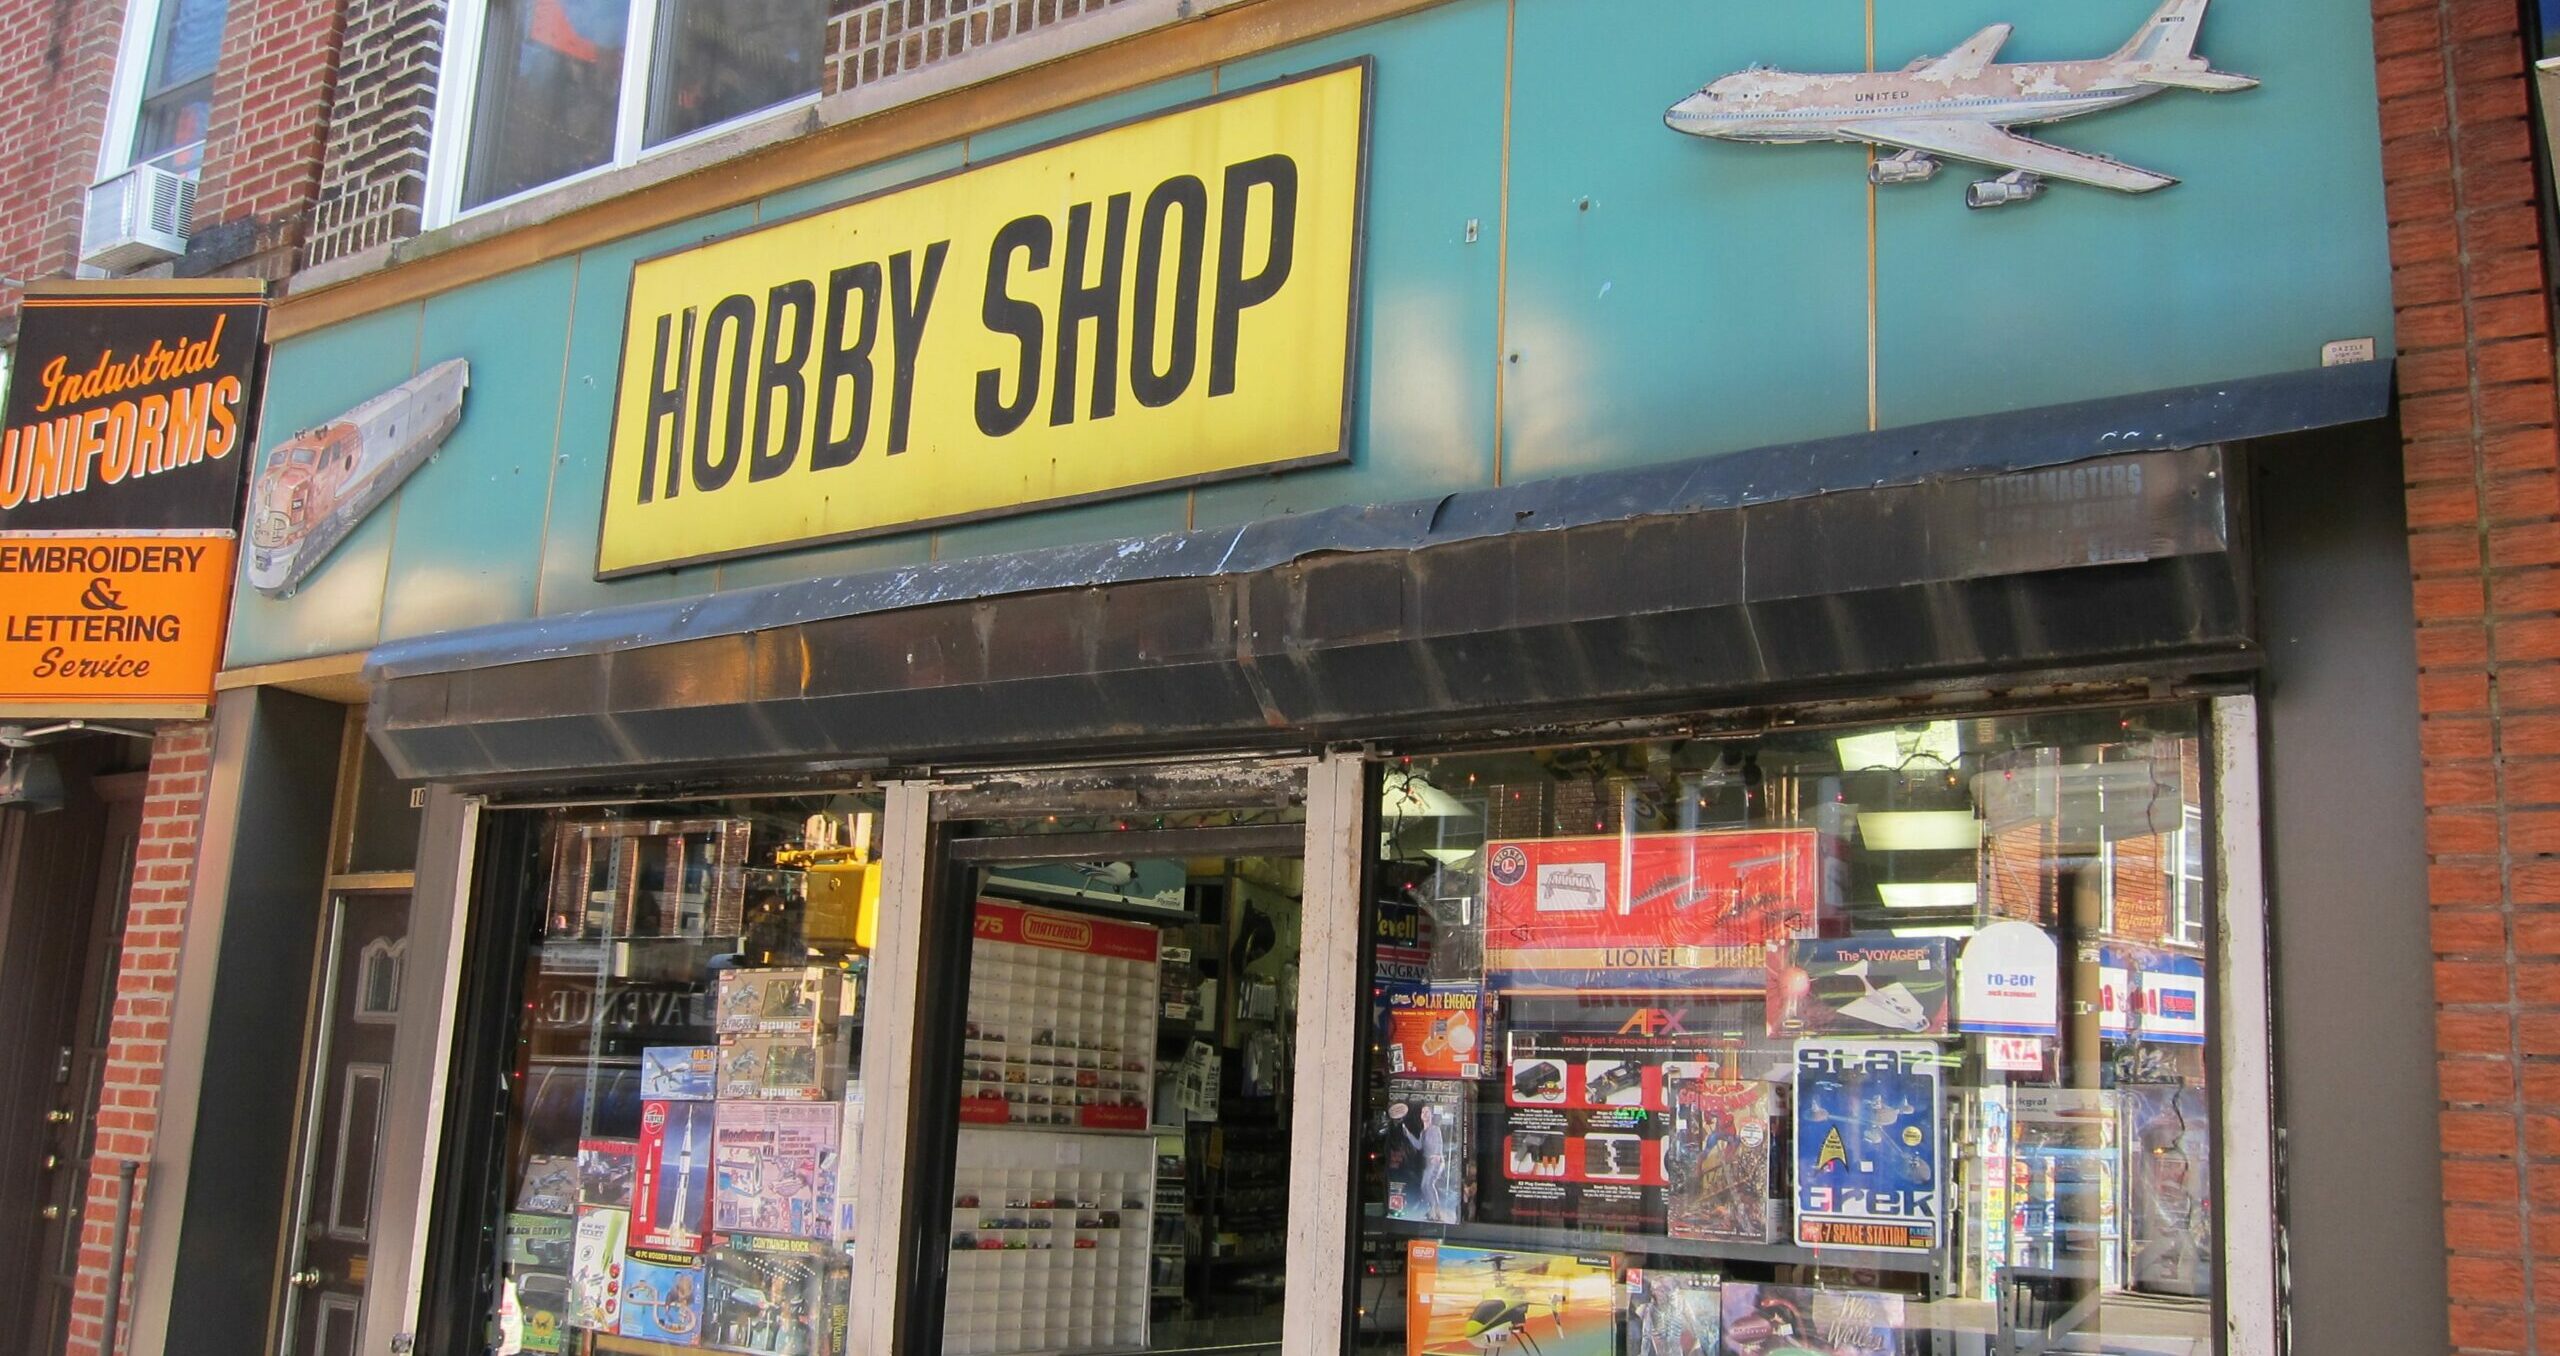 The Nice-ification of the Hobby Shop